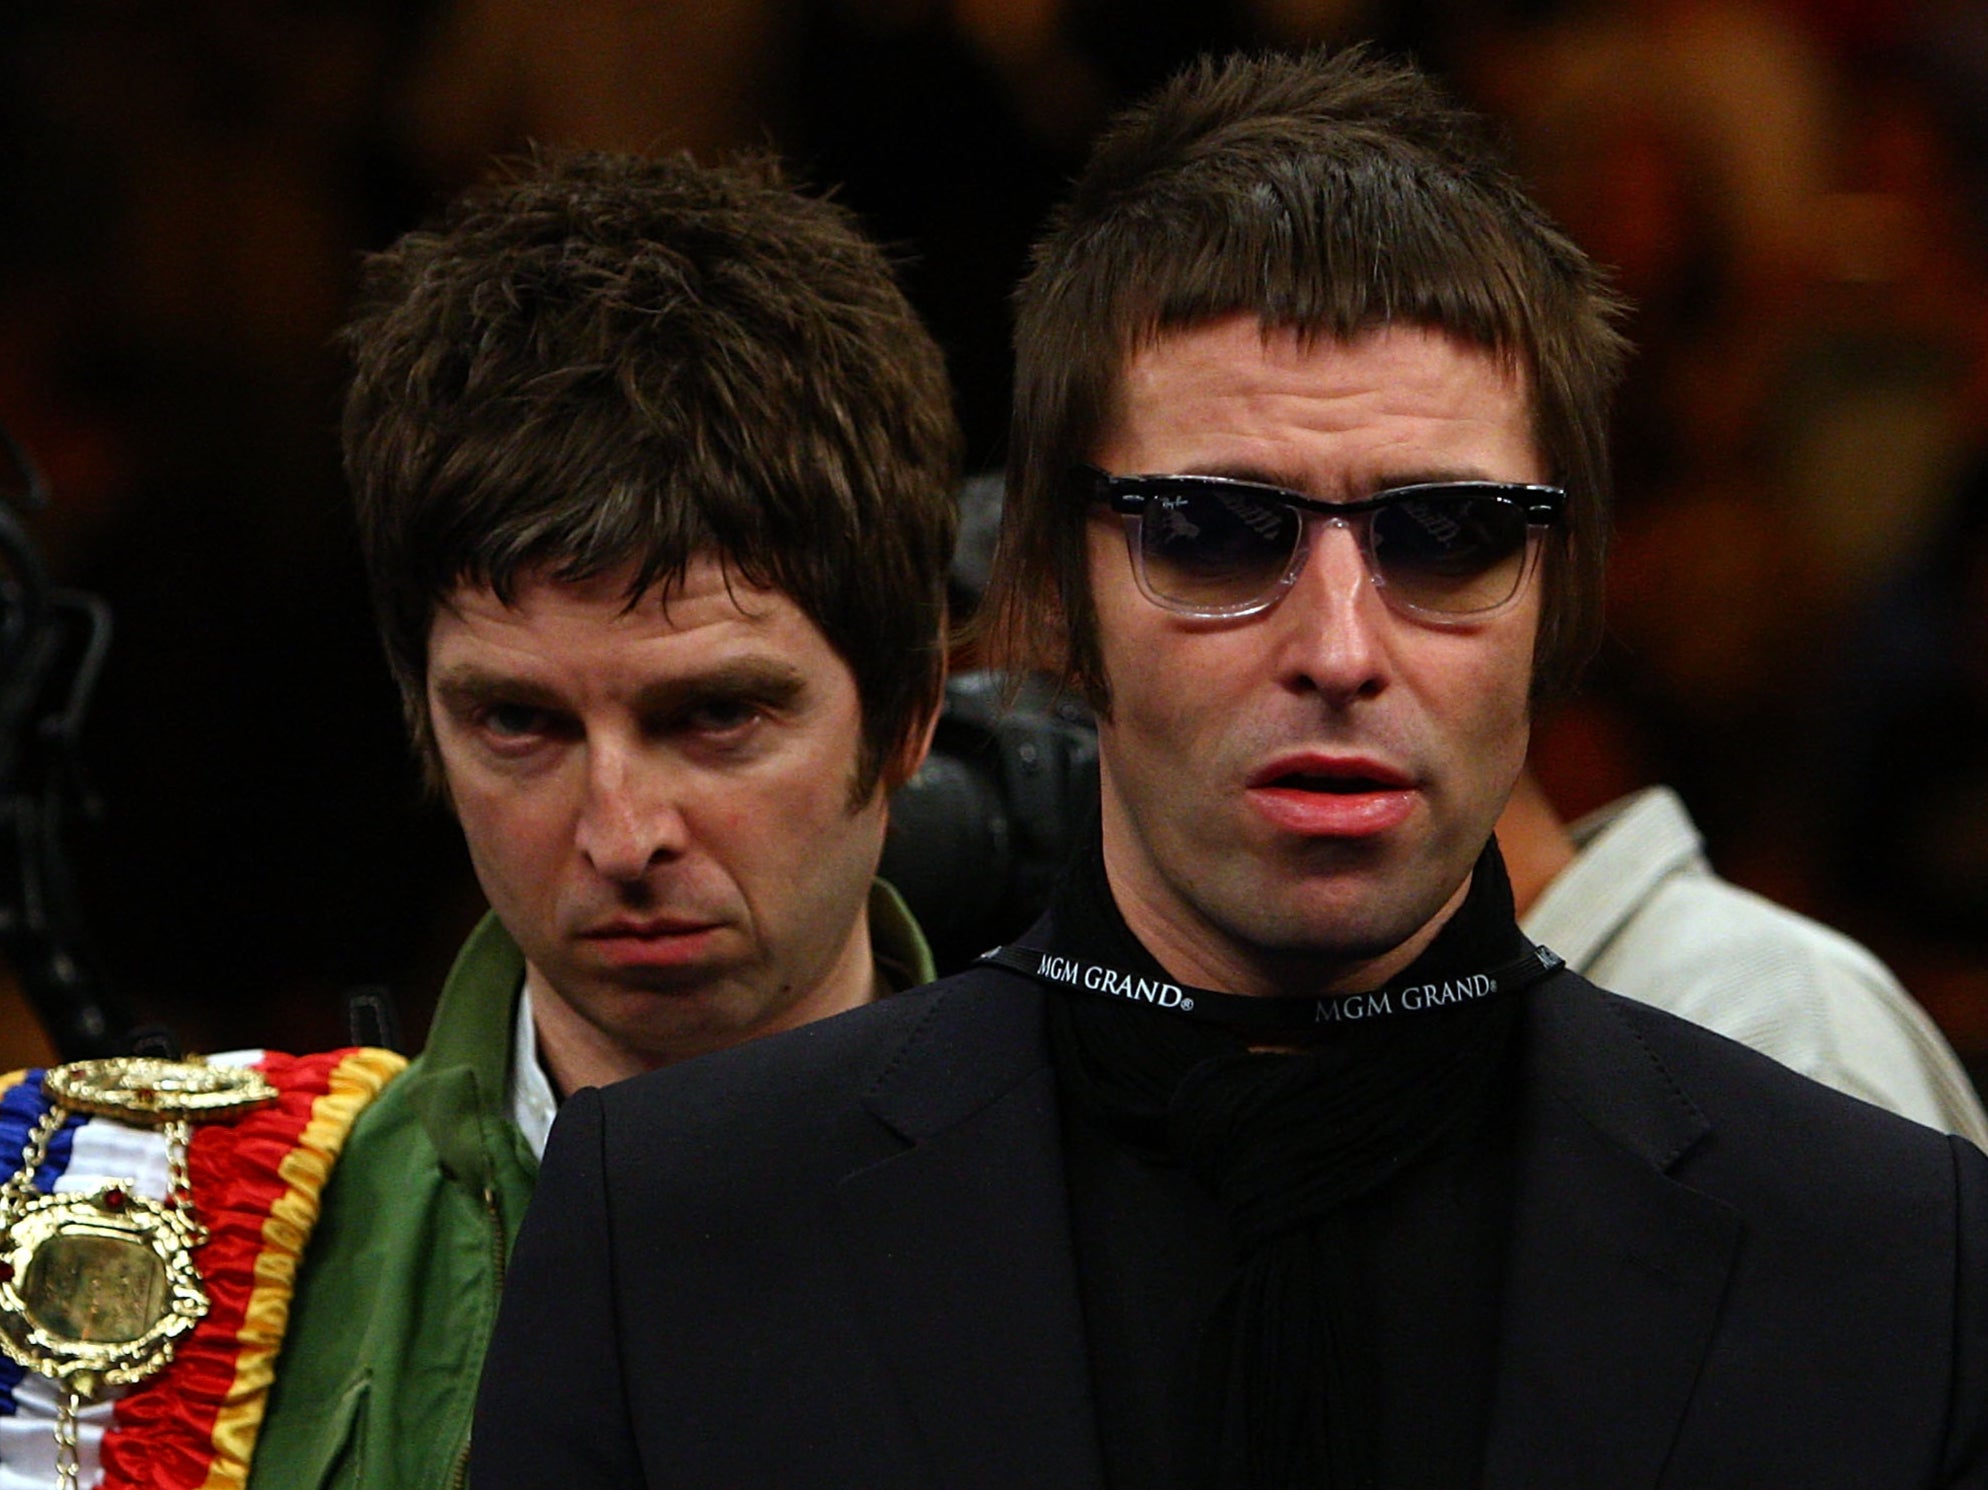 Noel and Liam Gallagher were at the forefront of the 1990s Britpop phenomenon